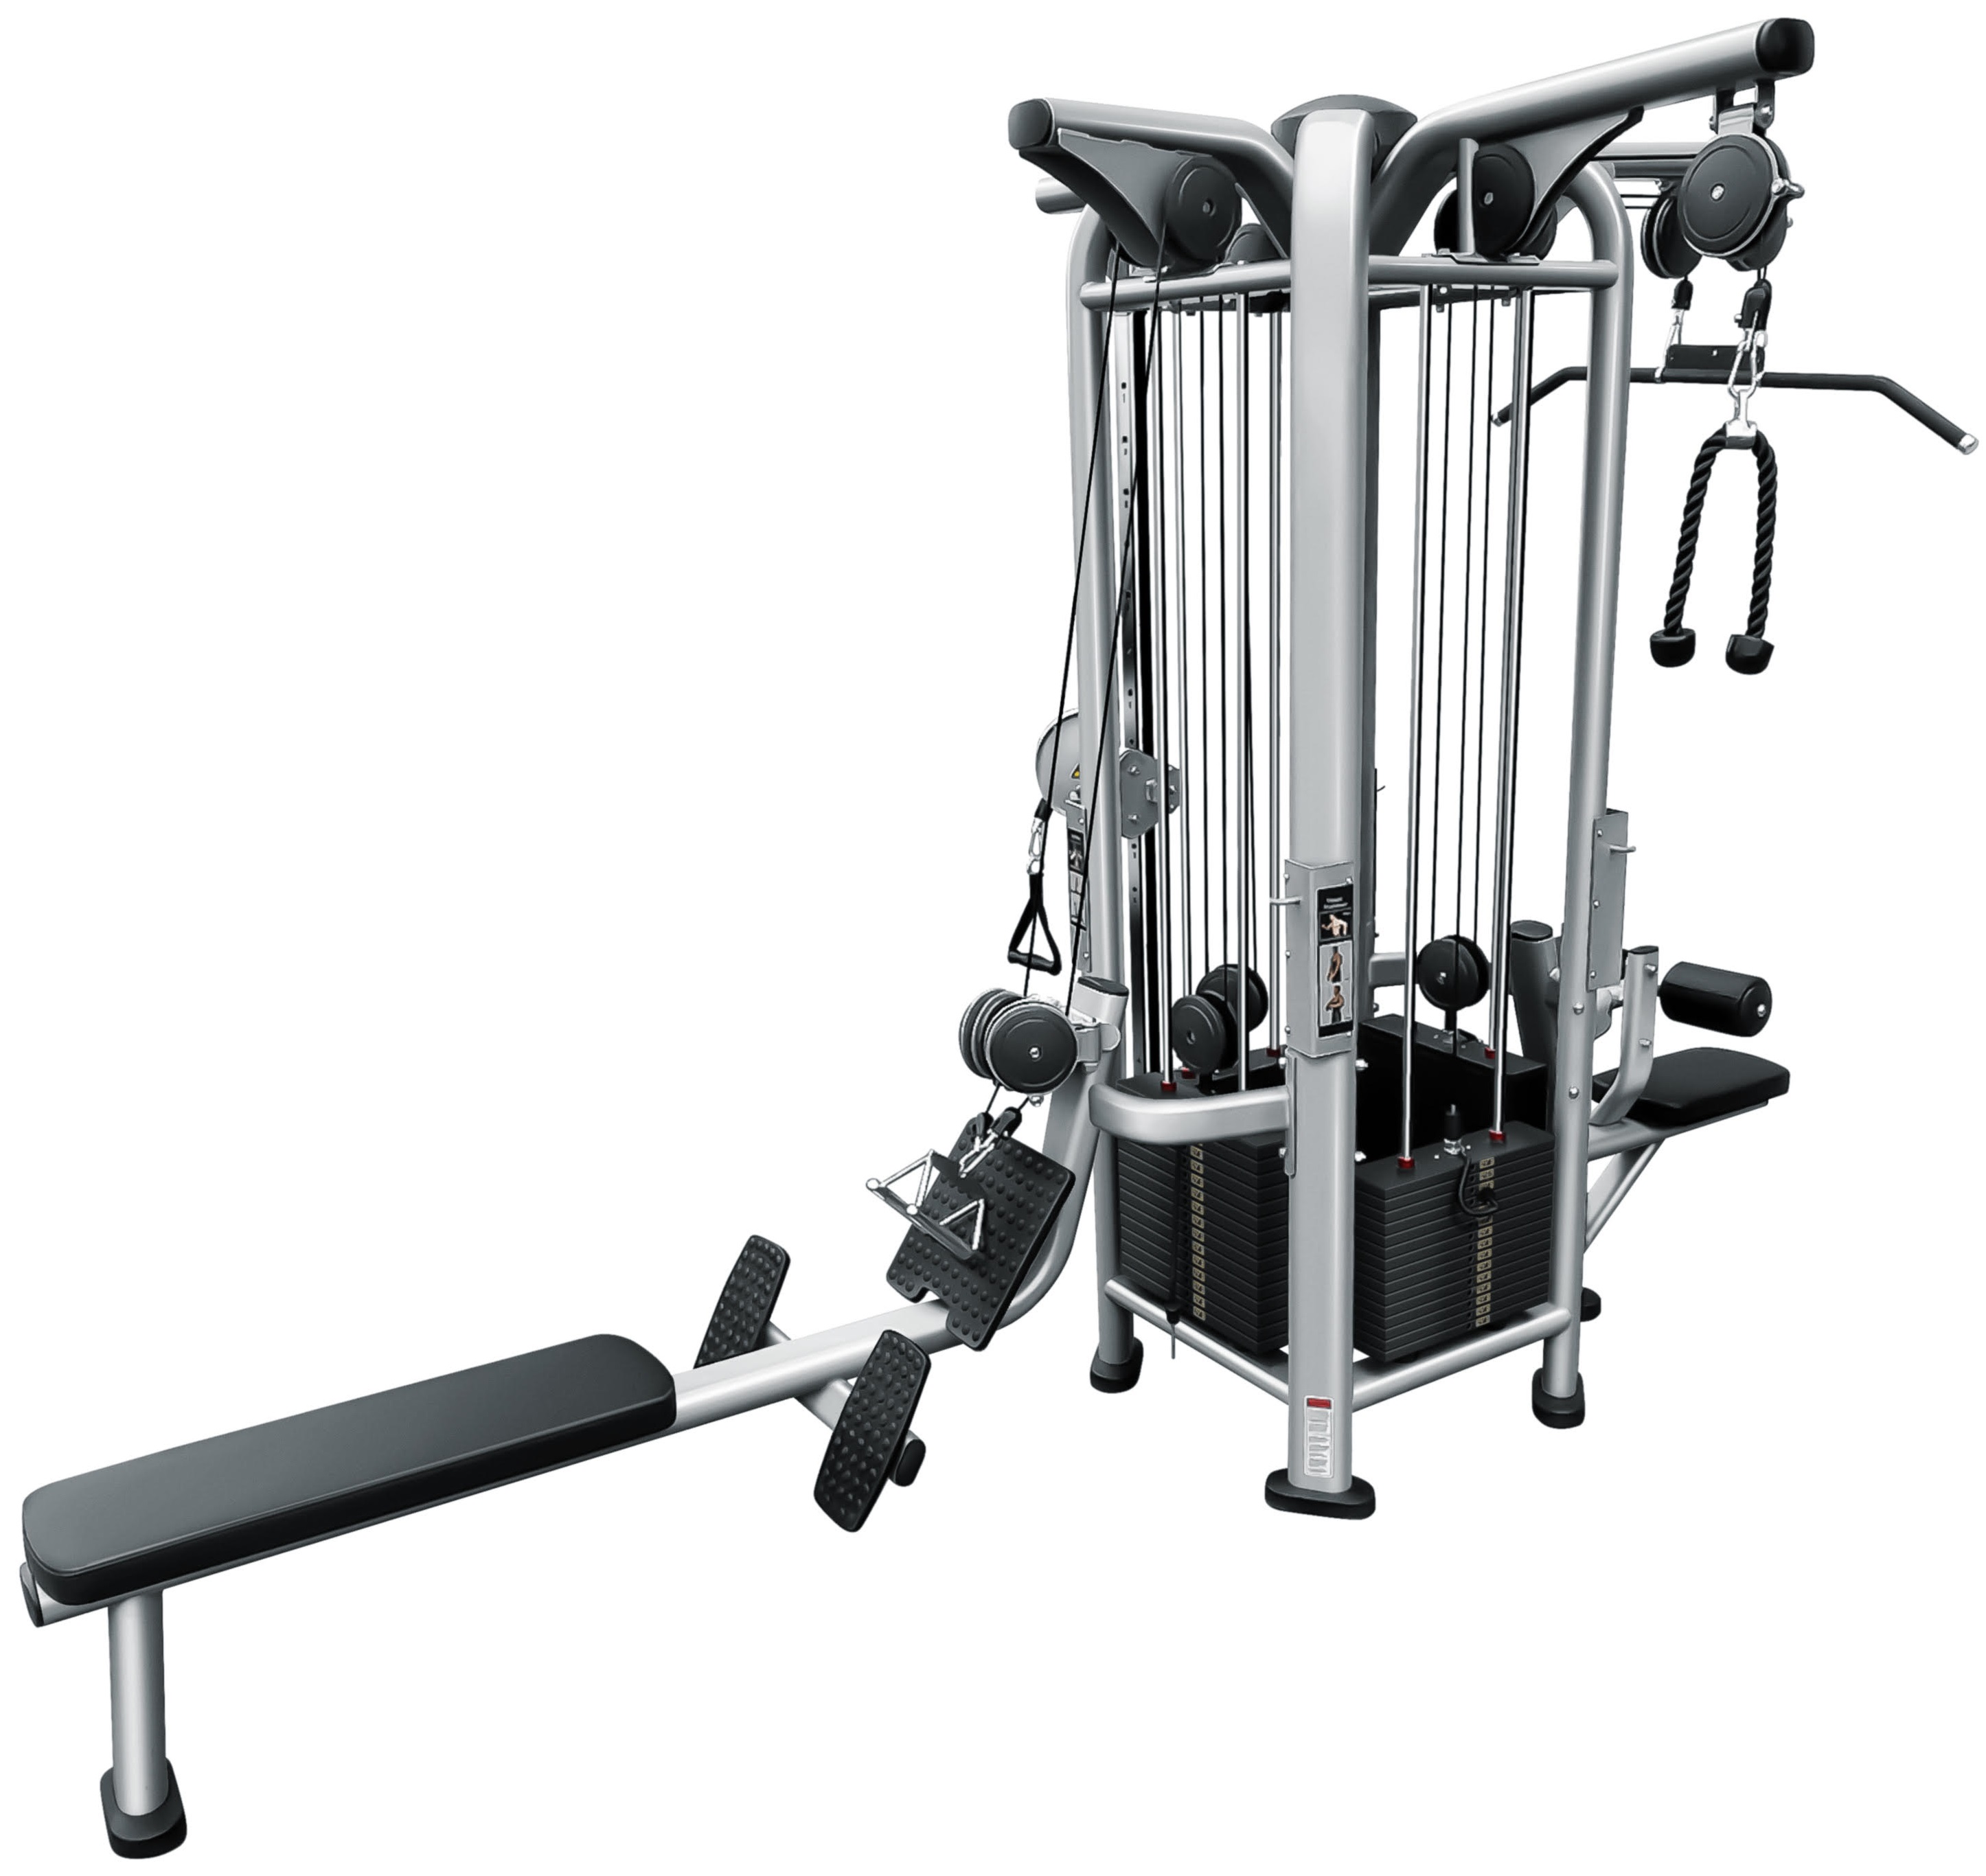 MULTI GYM 4 STATION JX930 158LBS (72KG) STACK WEIGHTS JX FITNESS   